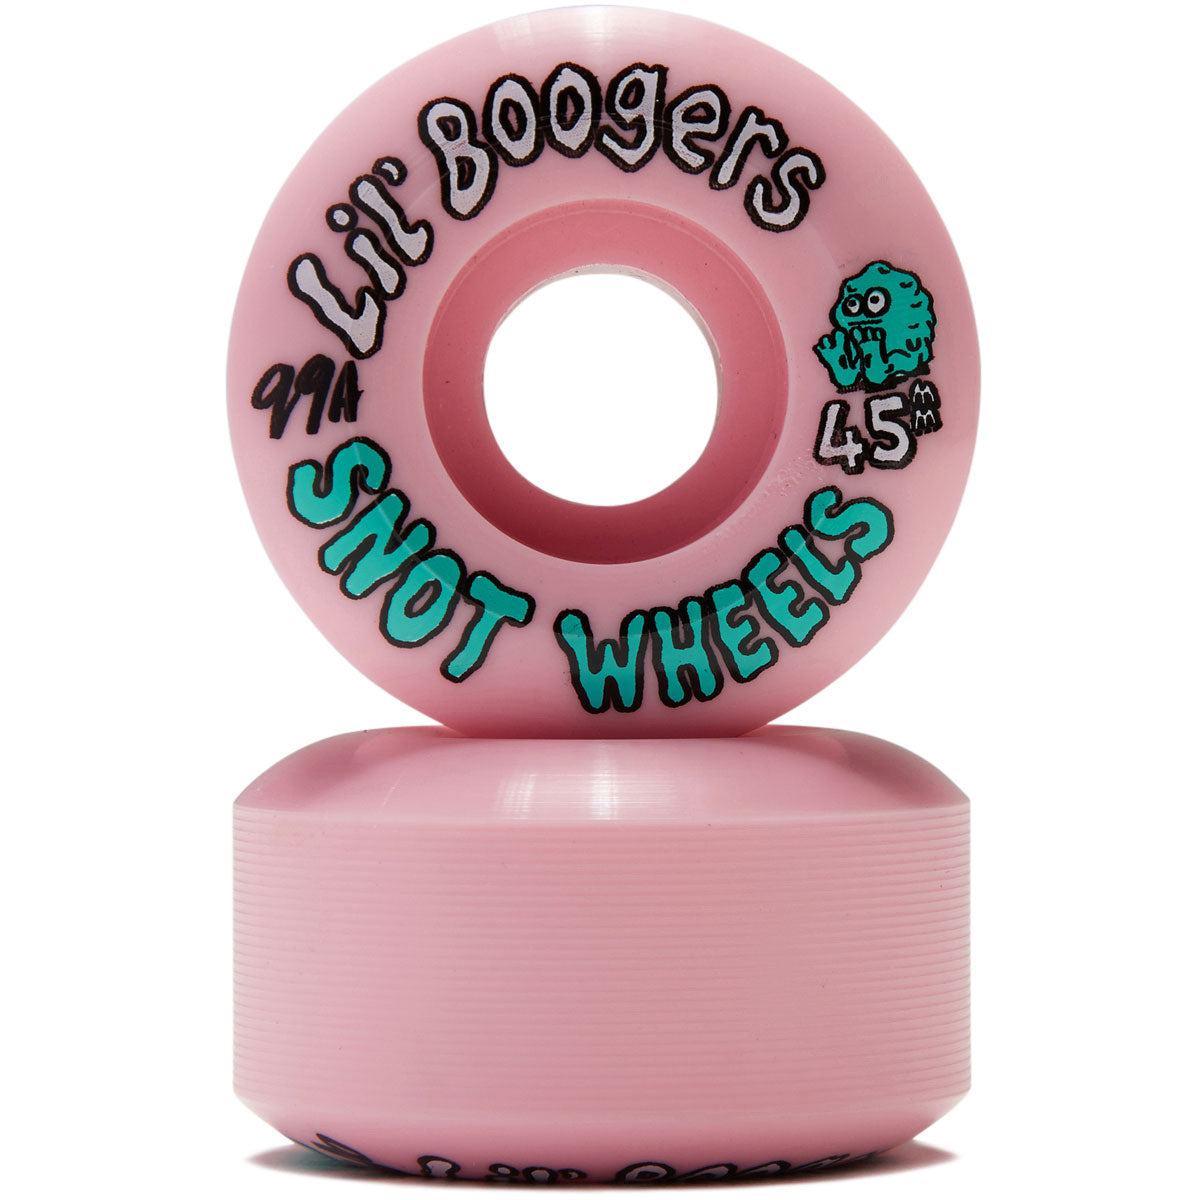 Snot Lil Boogers 99a Skateboard Wheels - Pink - 45mm image 2